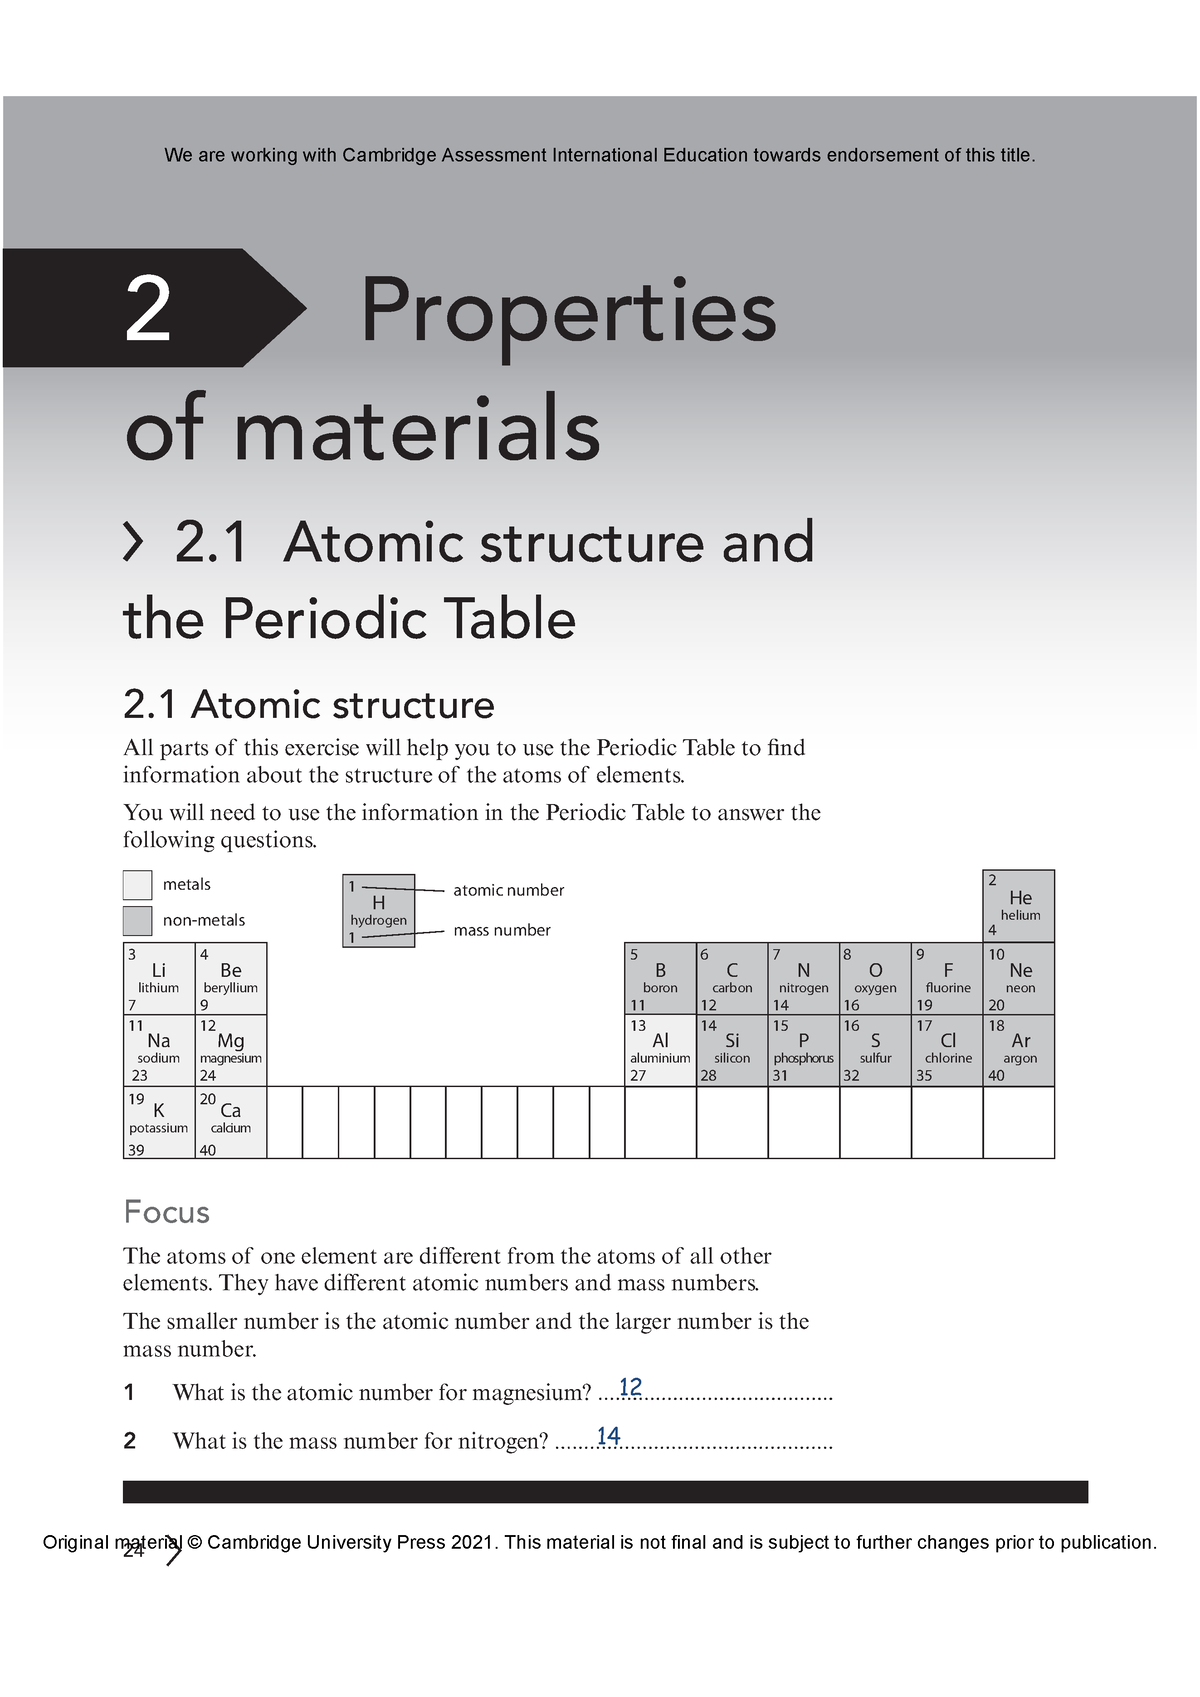 science-workbook-answers-unit-2-2-atomic-structure-and-the-periodic